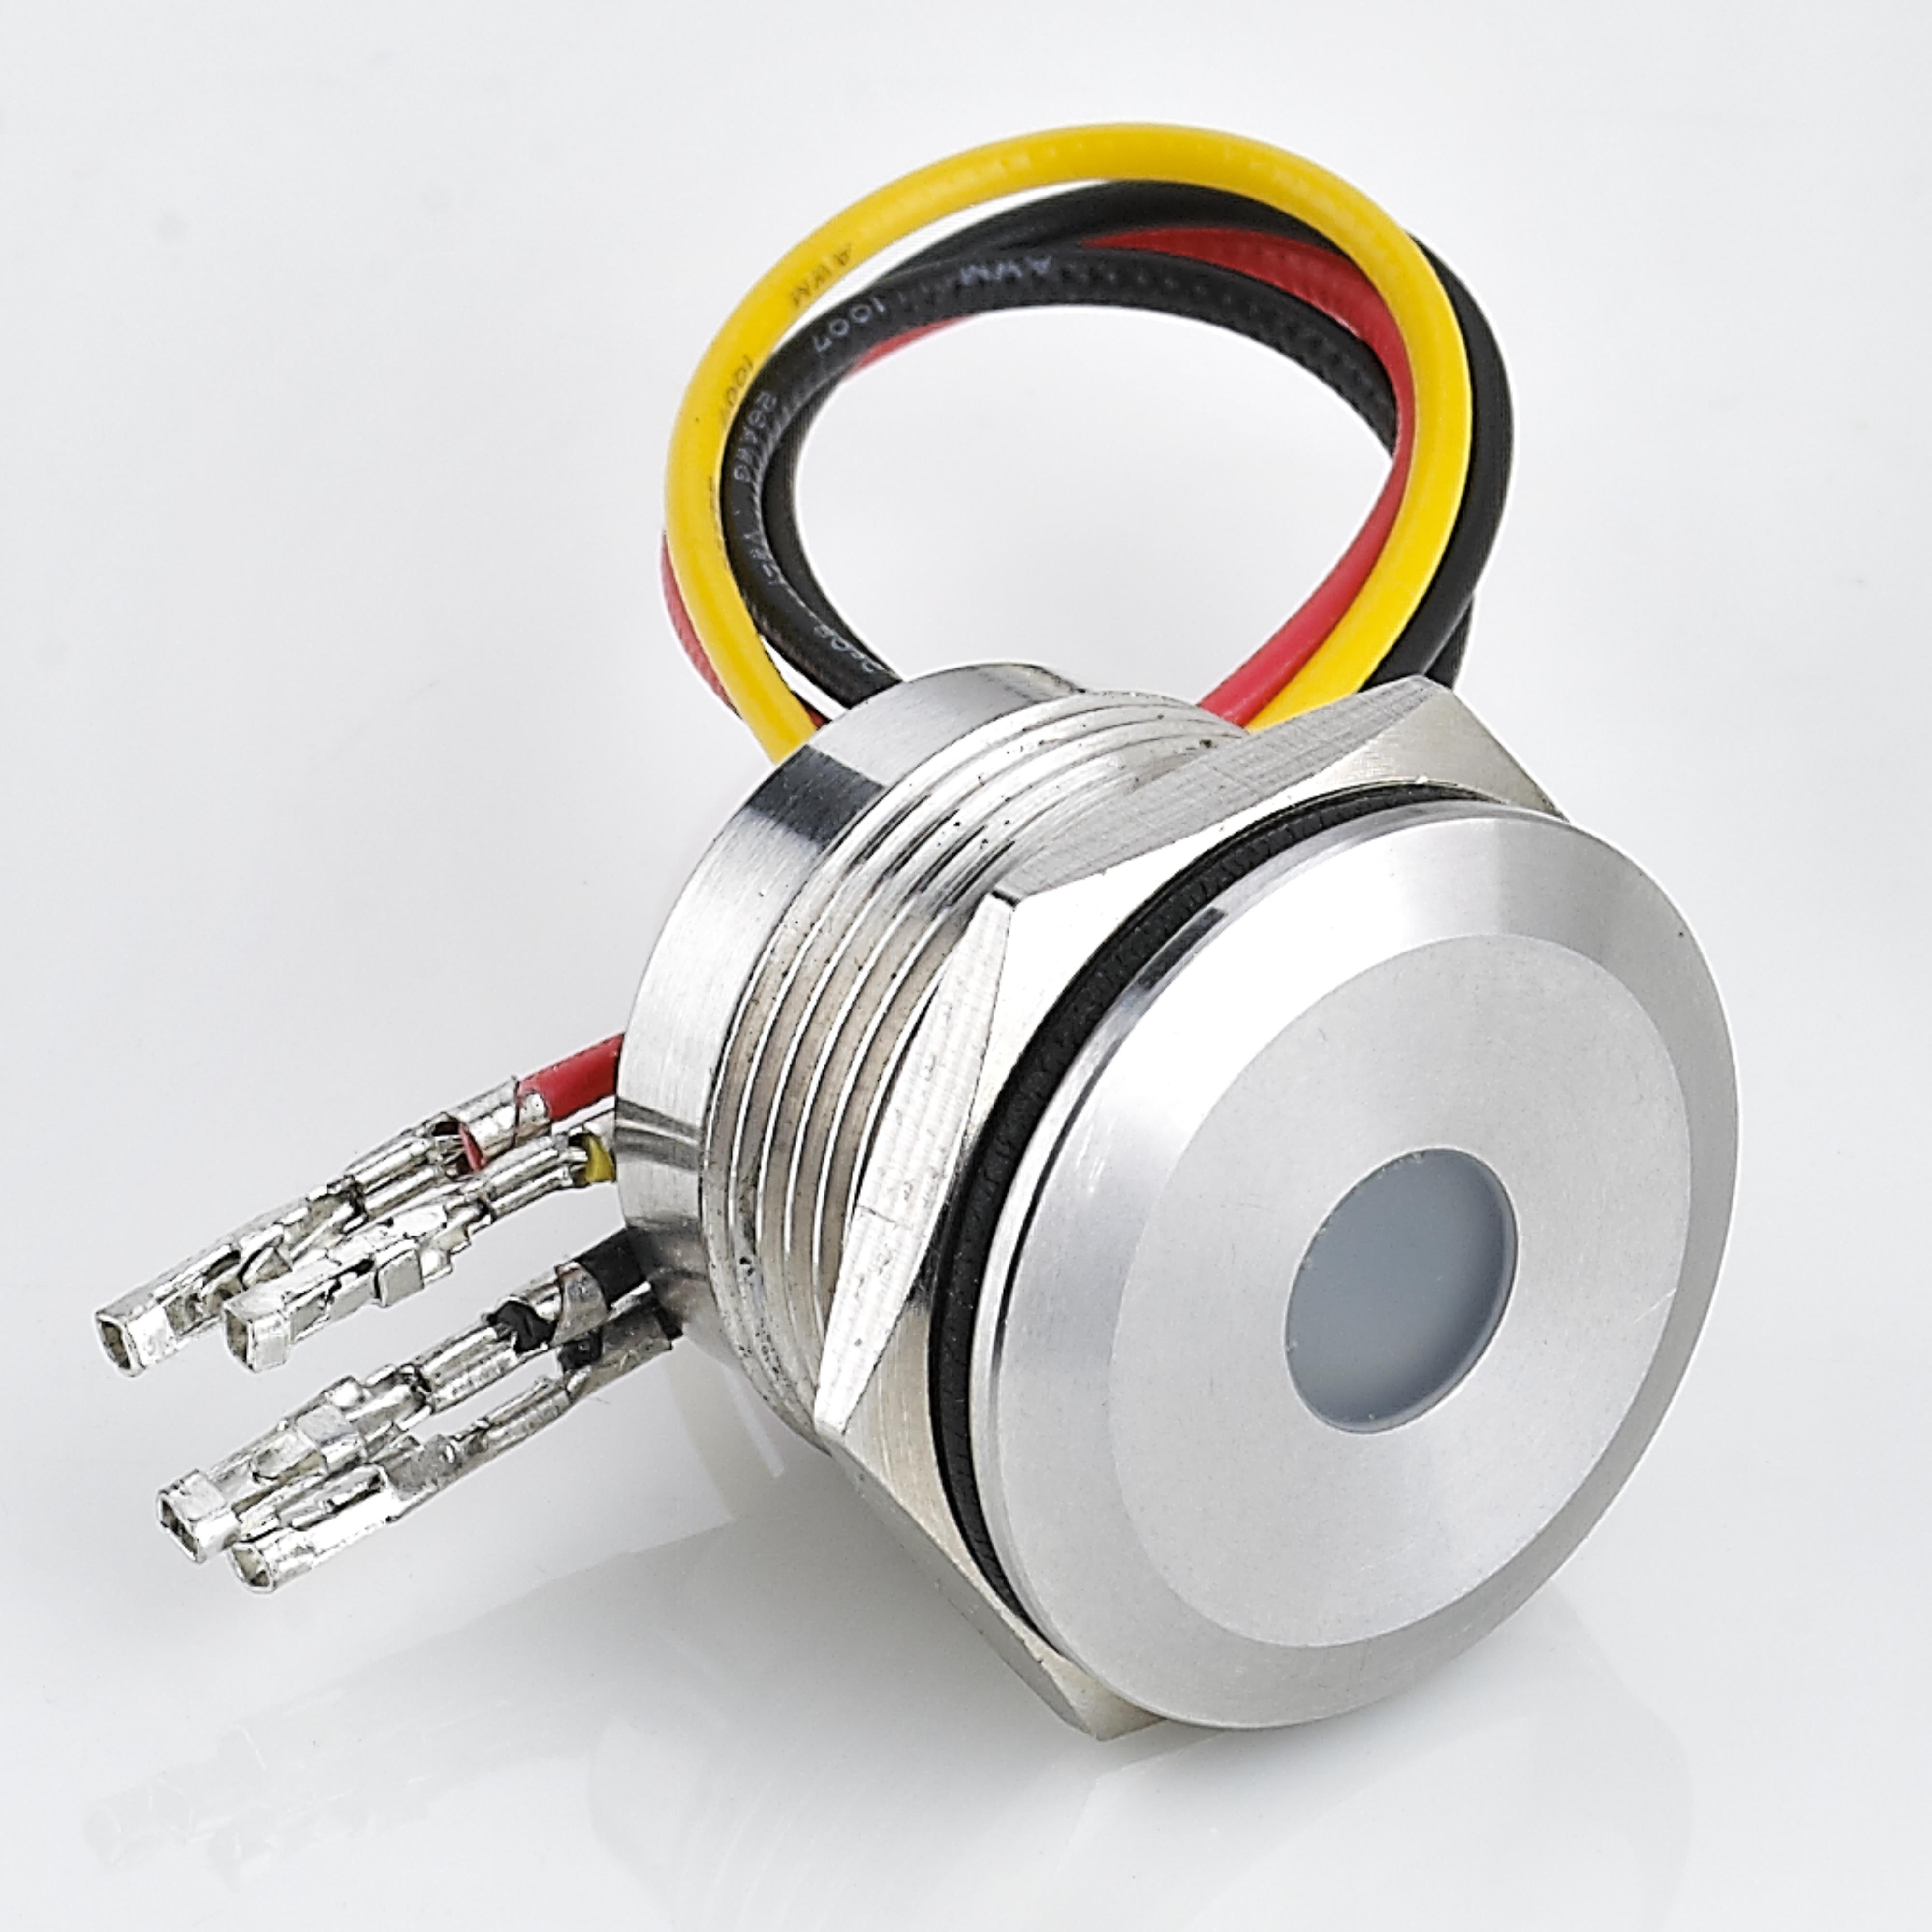 22mm piezo touch switch Momentary Ring LED Stainless Steel 1 Normally-Open